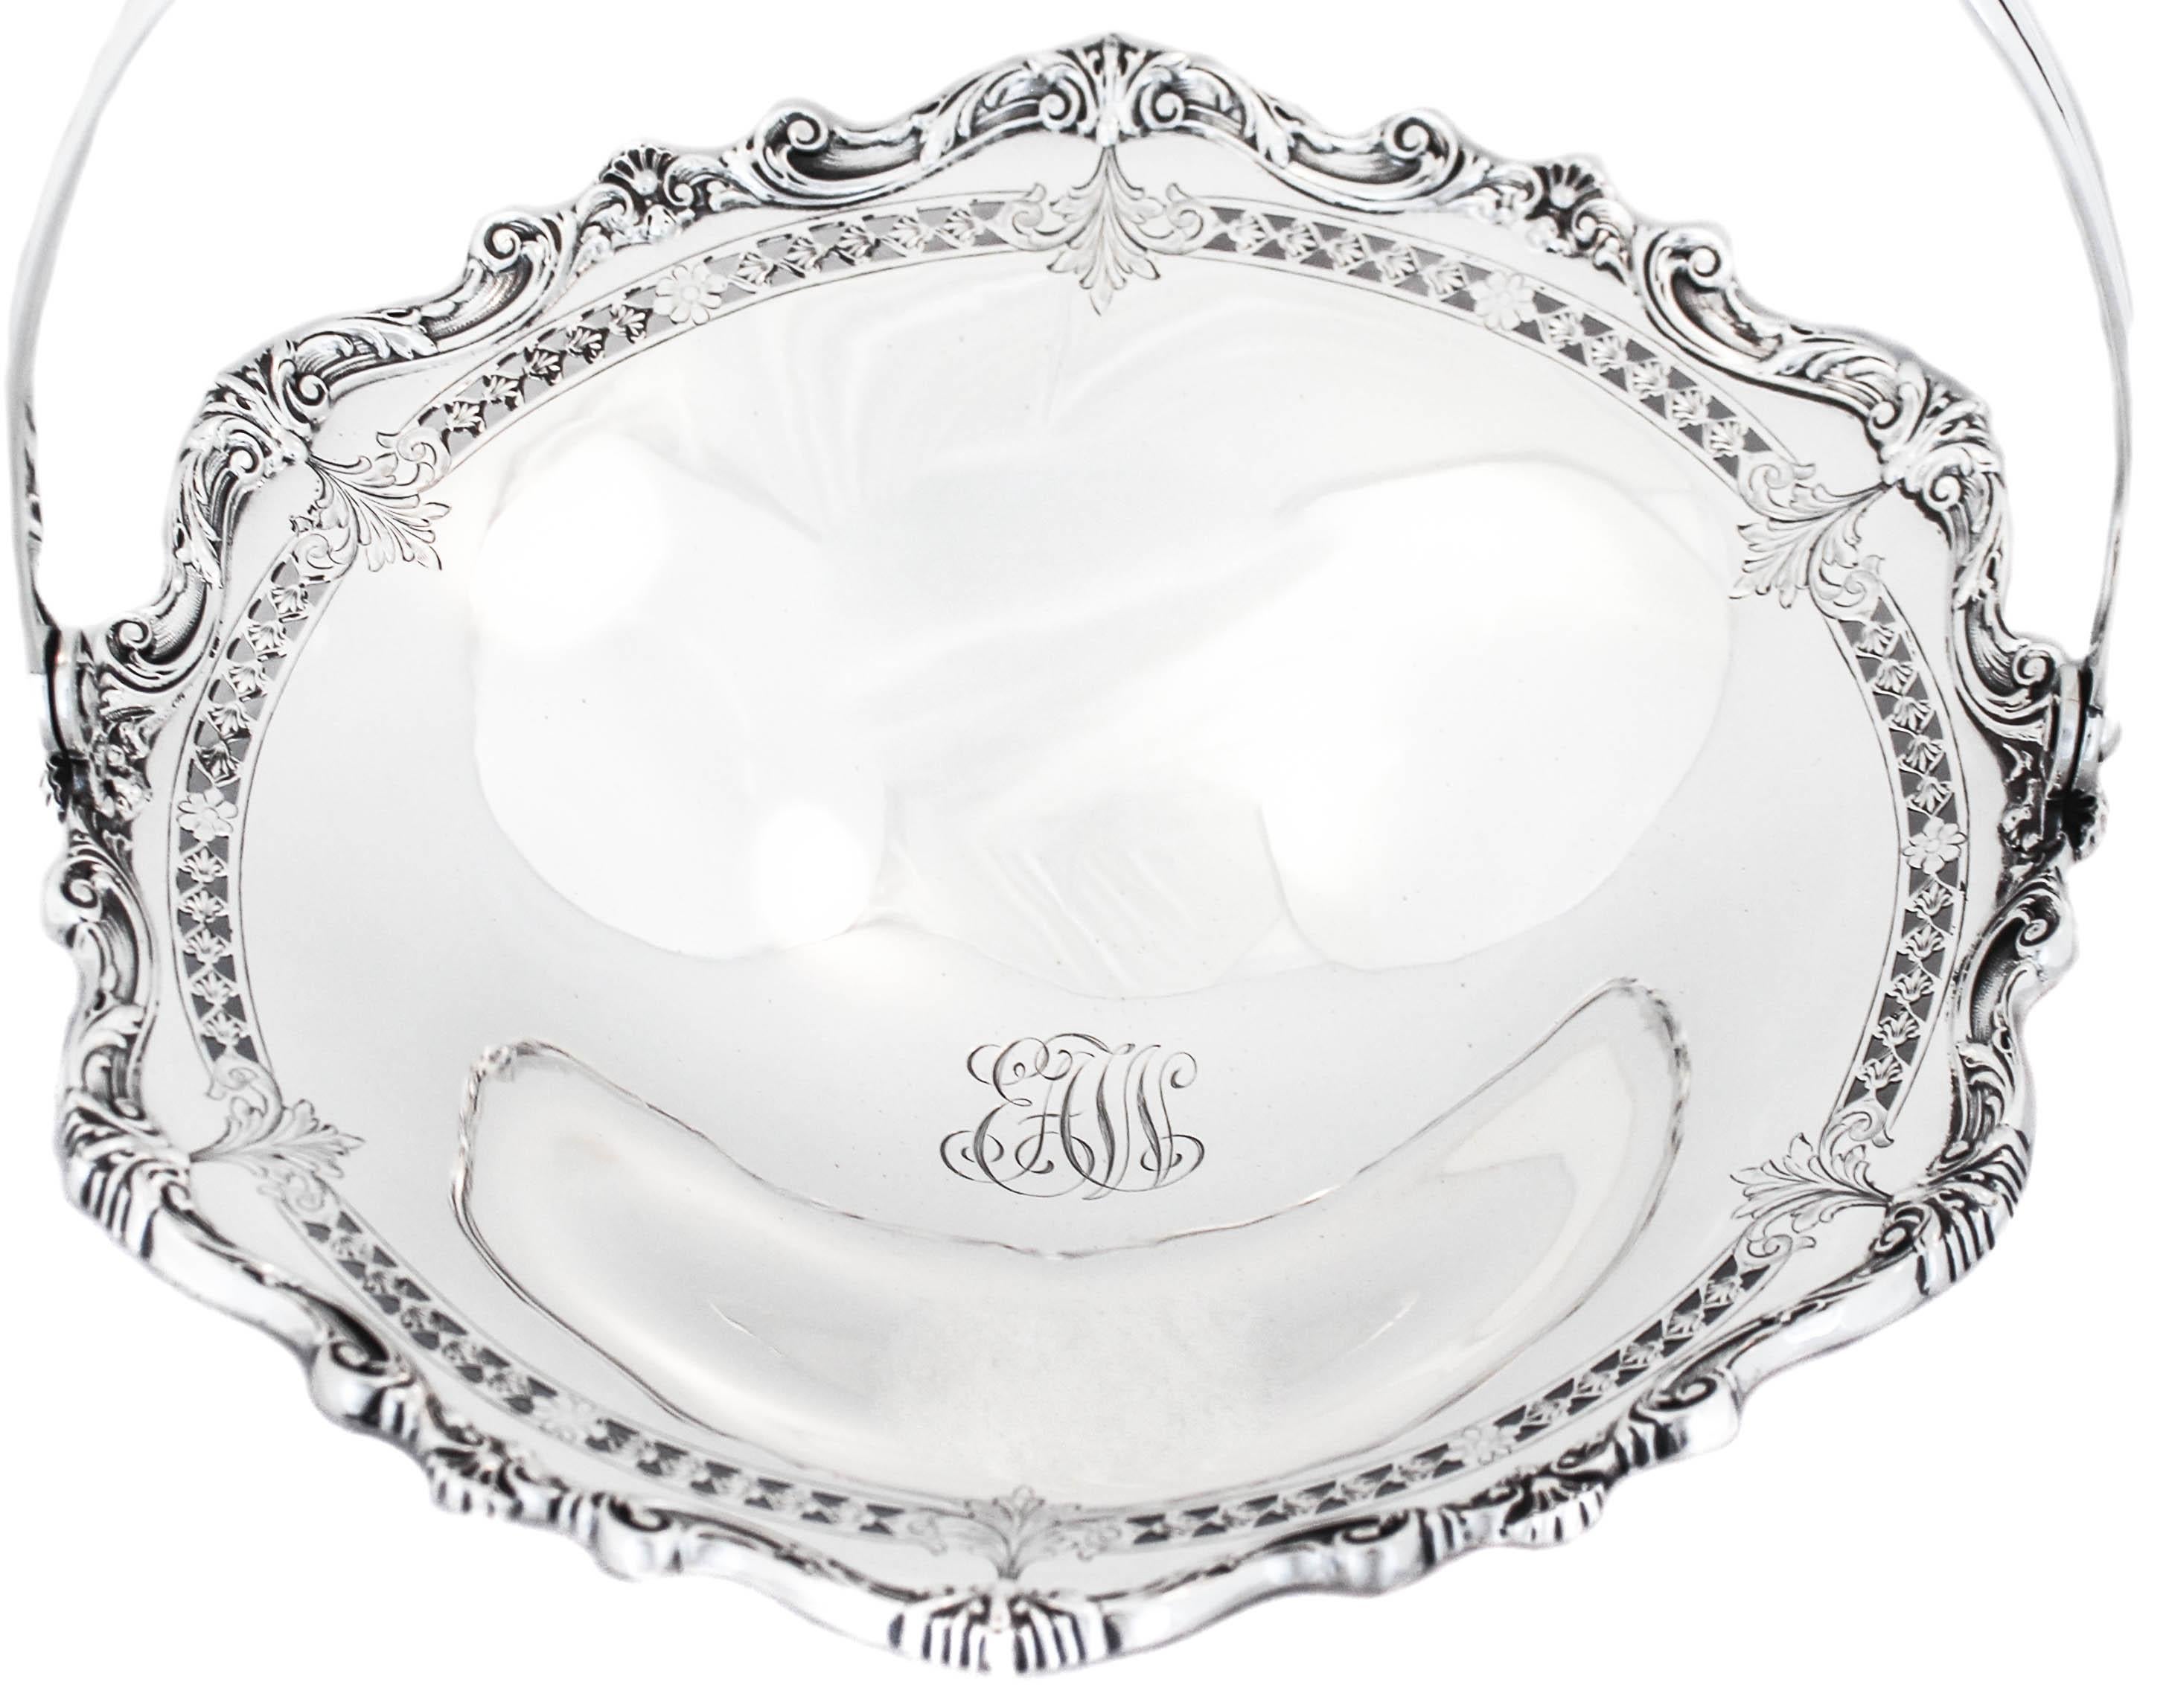 We are delighted to offer you this sterling silver basket by the world renowned Tiffany & Company. An interesting mix of modern and traditional; the handle is sleek and modern while the basket is ornate and traditional. The best of both worlds!!
It